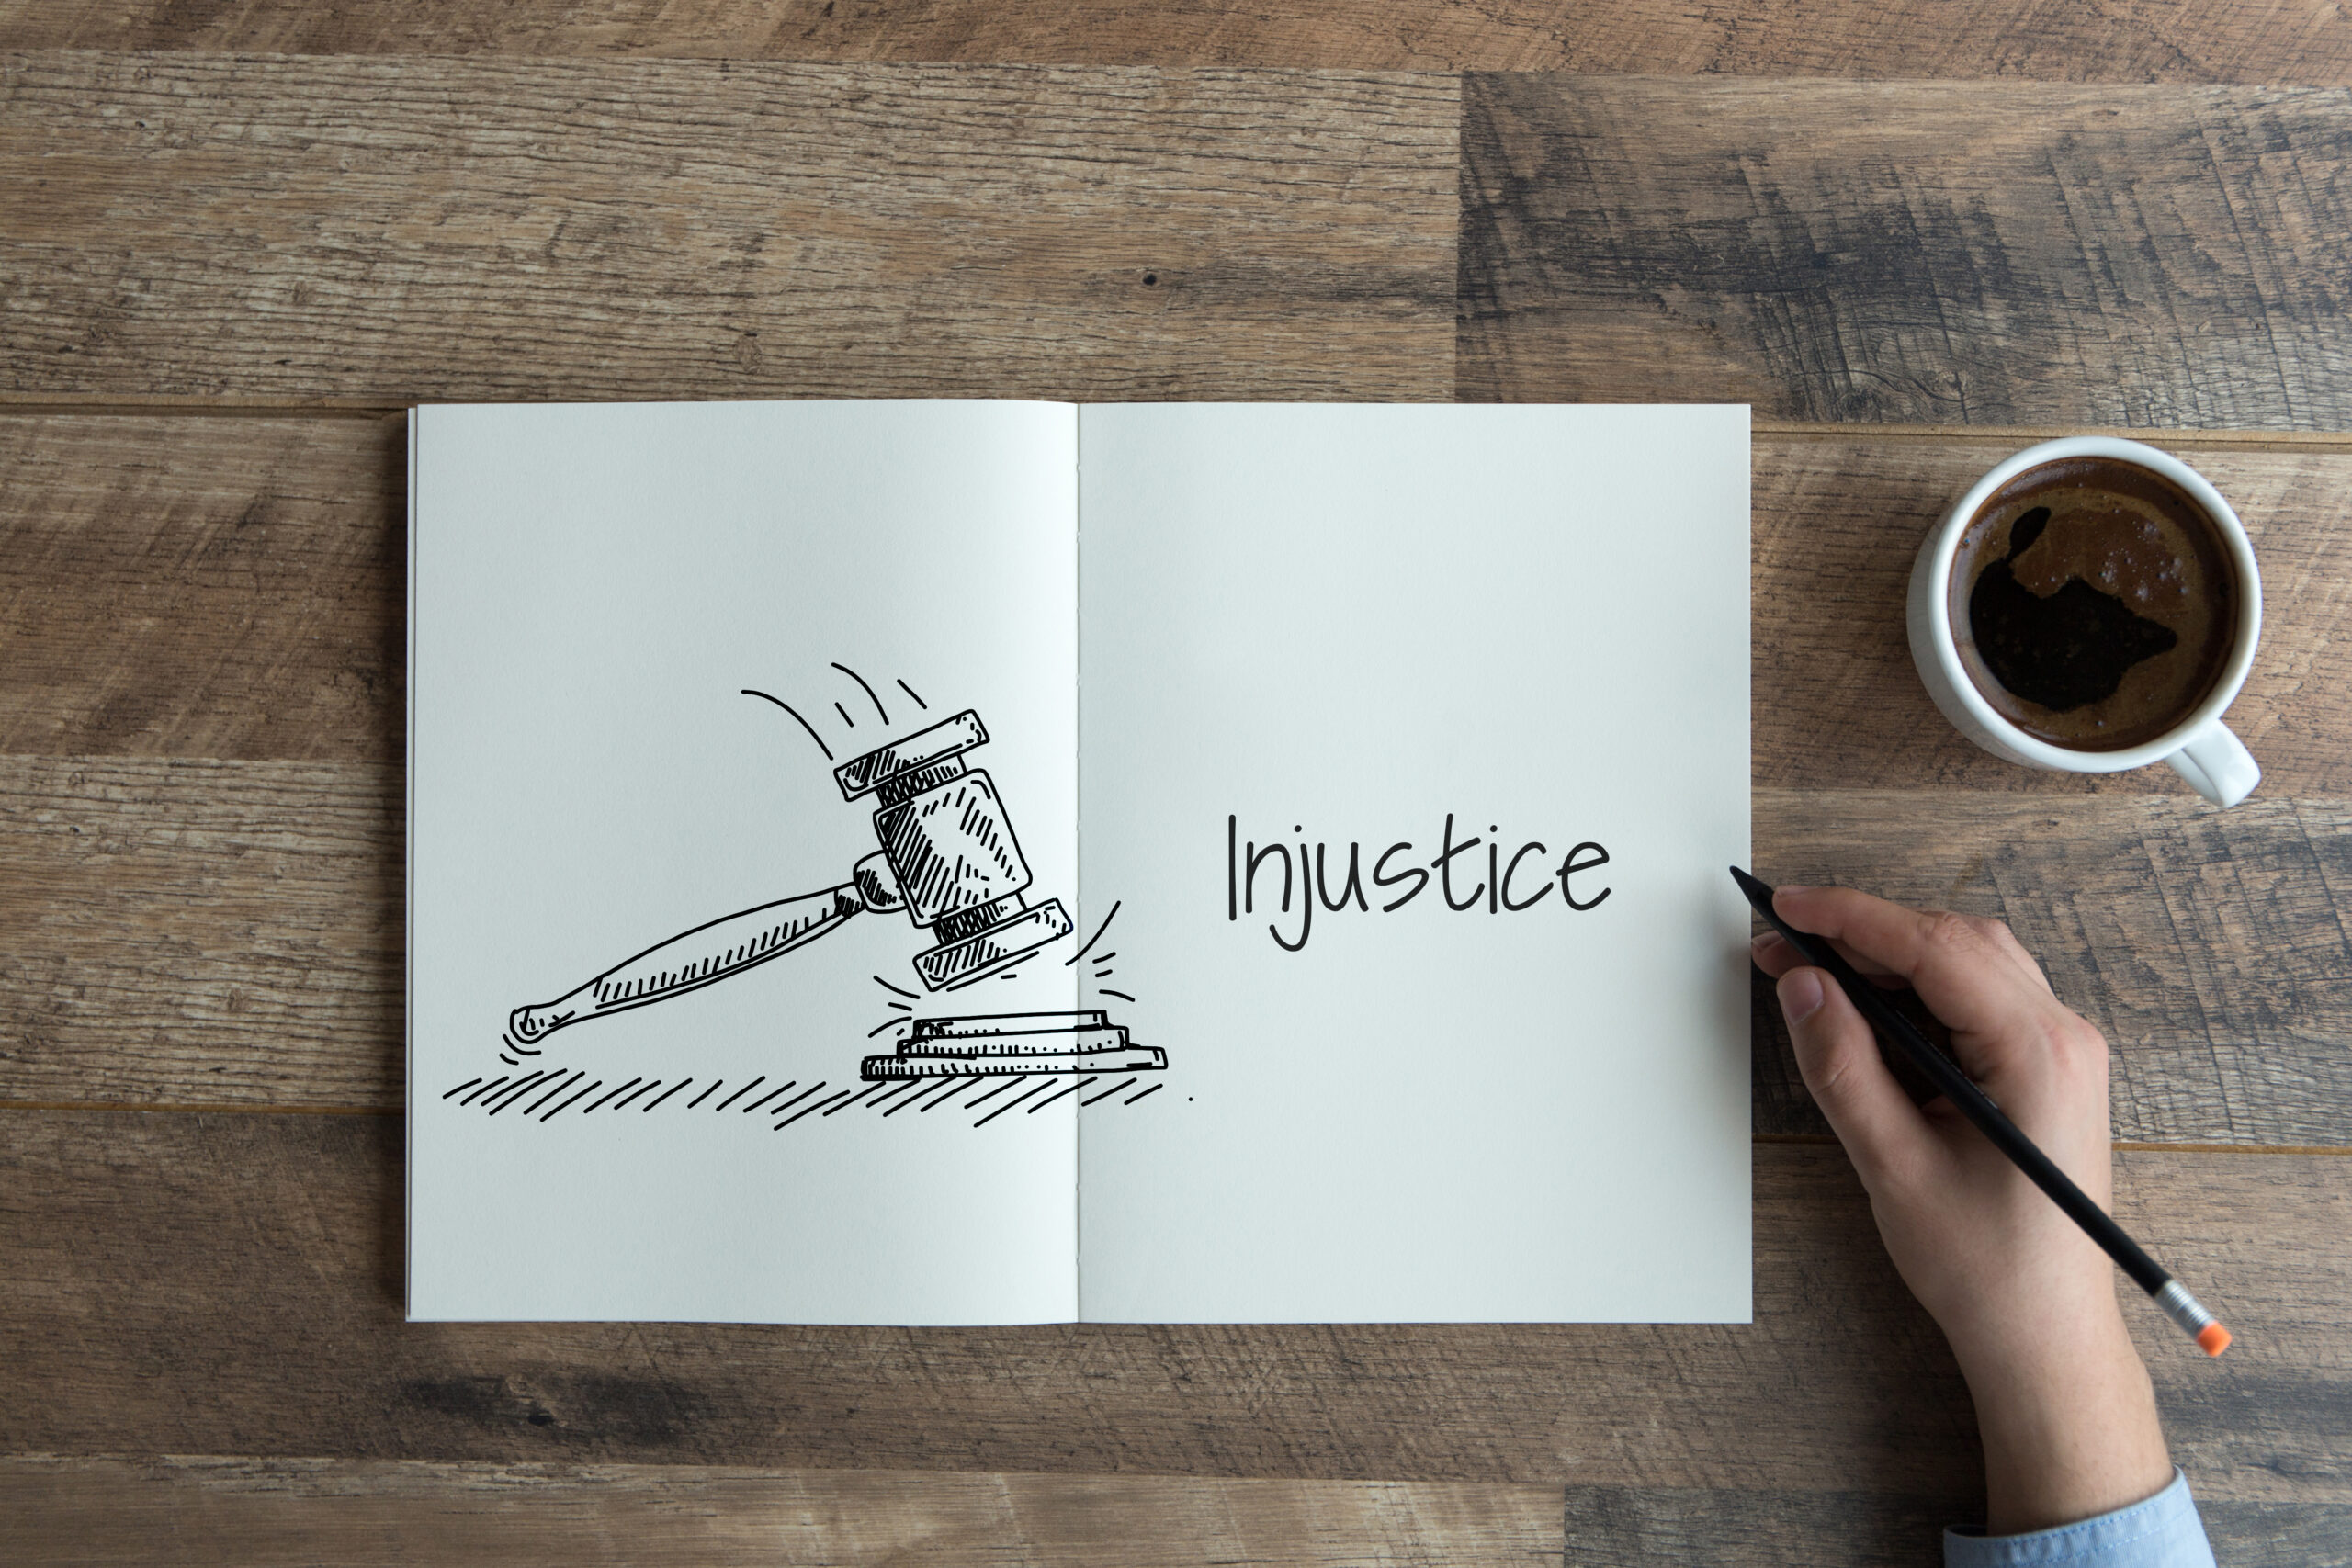 Folded paper with gavel on one side and tne word "Injustice" on the other isdel[